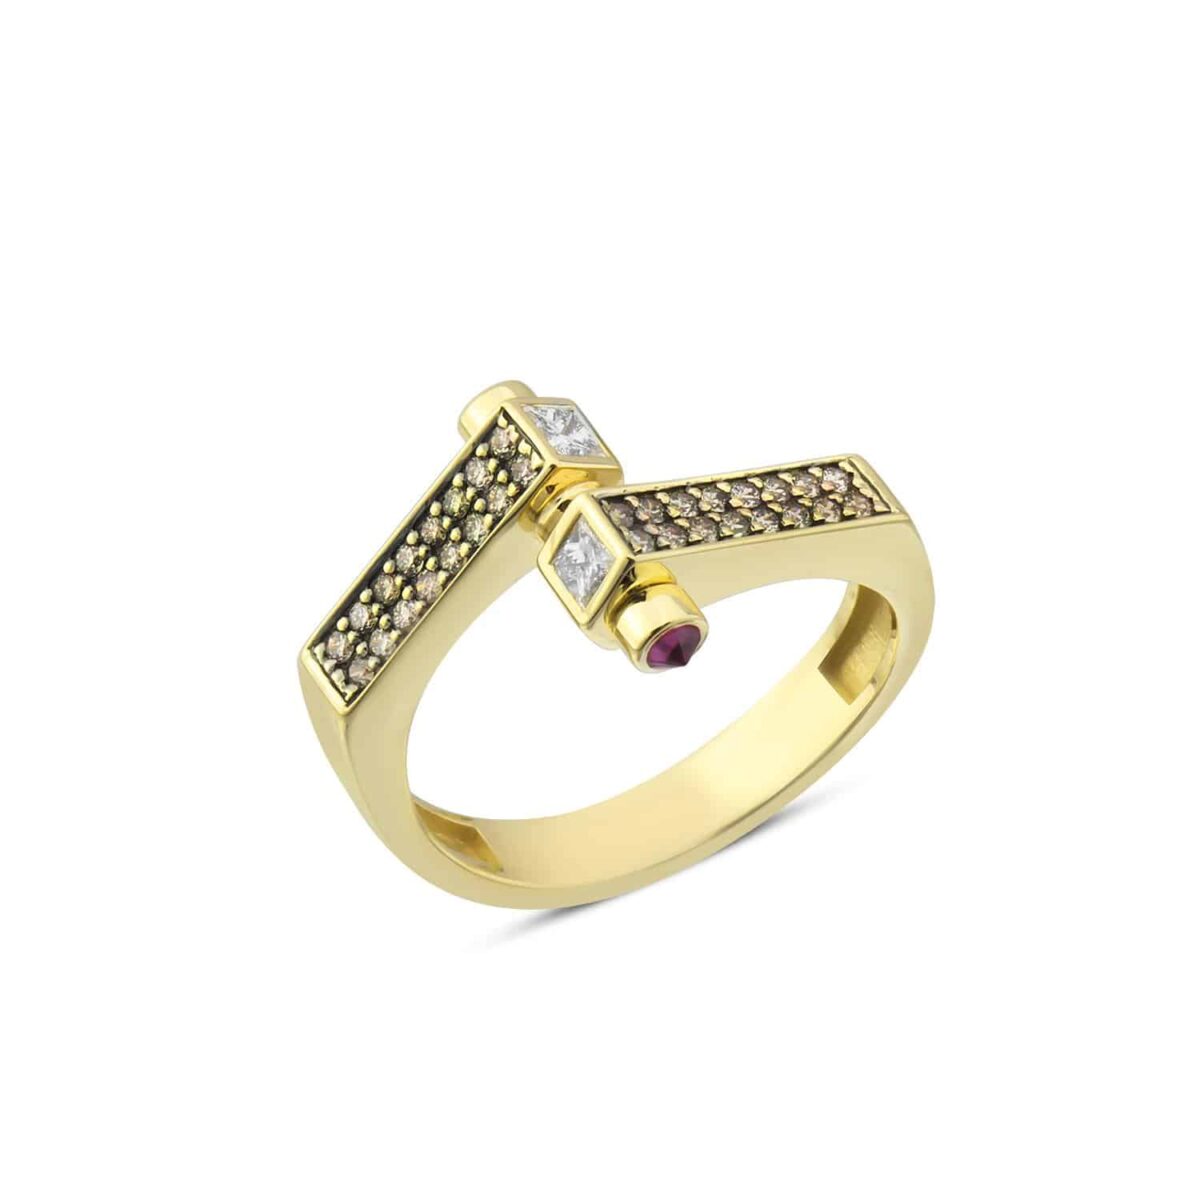 Sia Ring (Champagne Diamond) -Intersecting